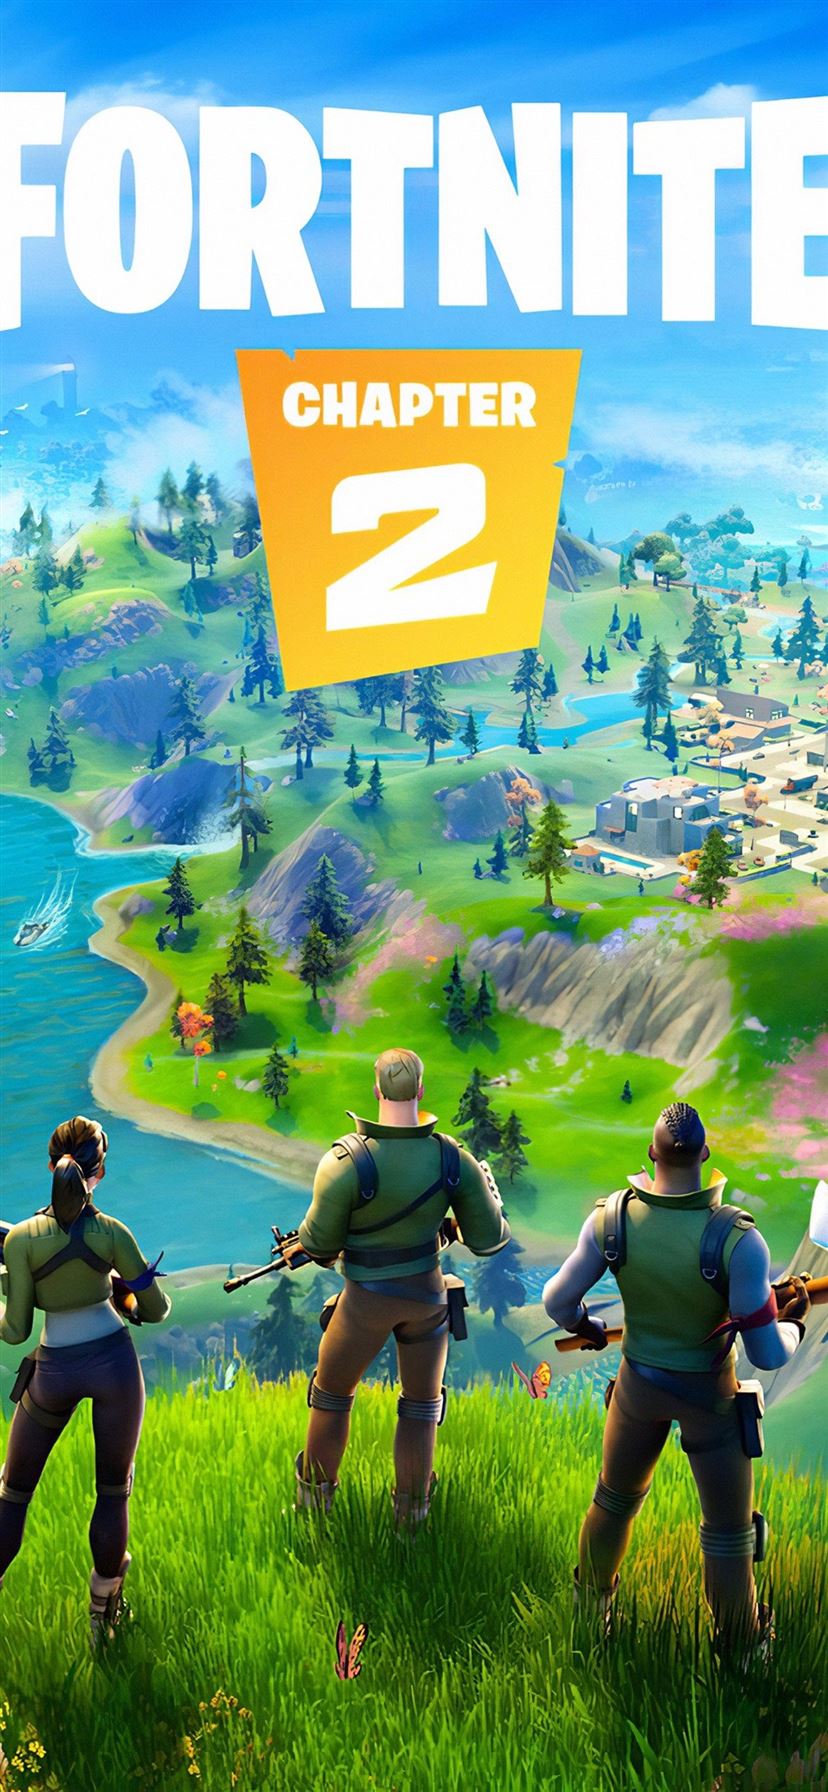 Fortnite Chapter 2 2019 4k Iphone Wallpapers Free Download